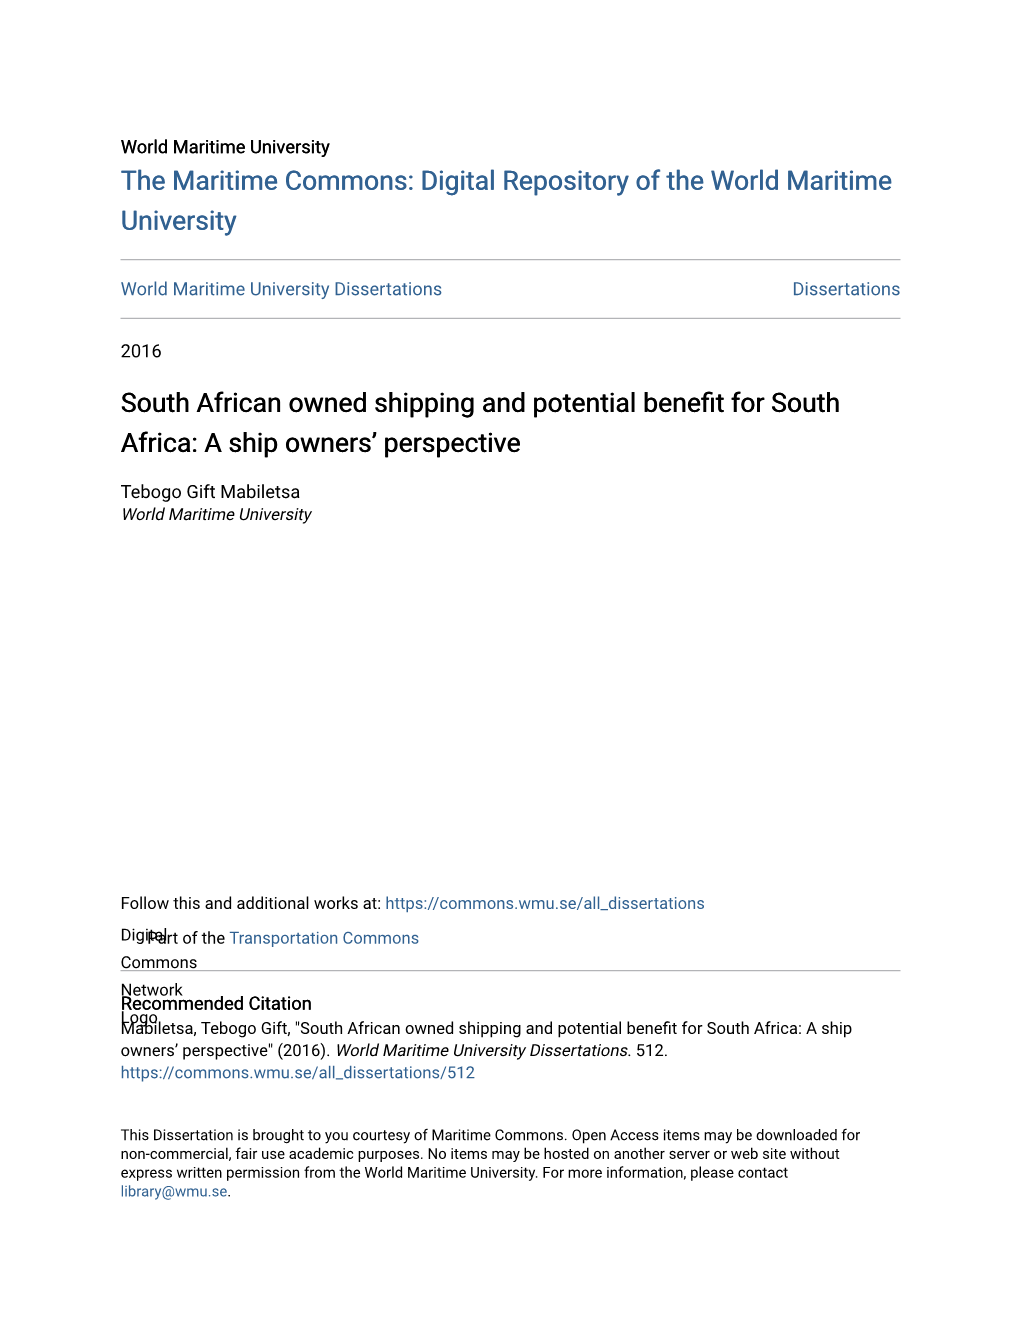 South African Owned Shipping and Potential Benefit for South Africa: a Ship Owners’ Perspective